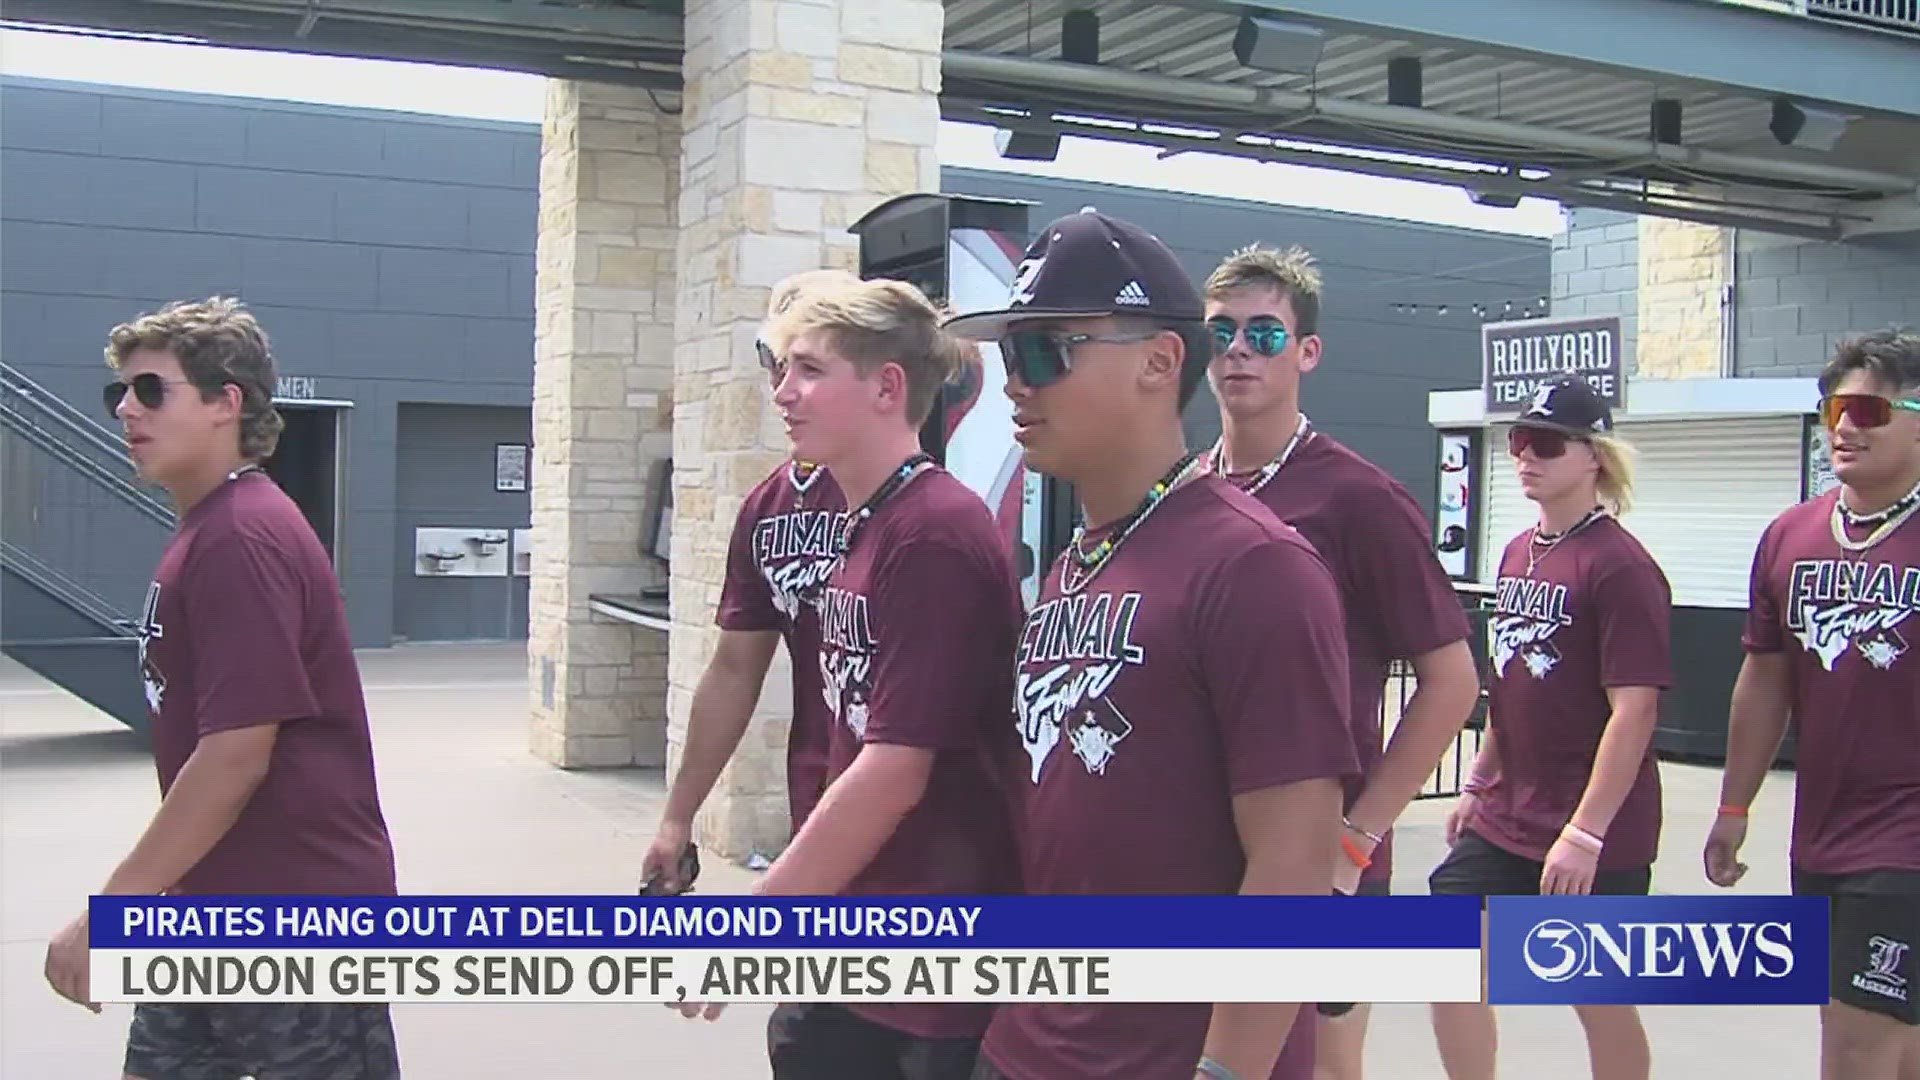 The Pirates are making their third straight appearance at state as they look to make it back-to-back titles.